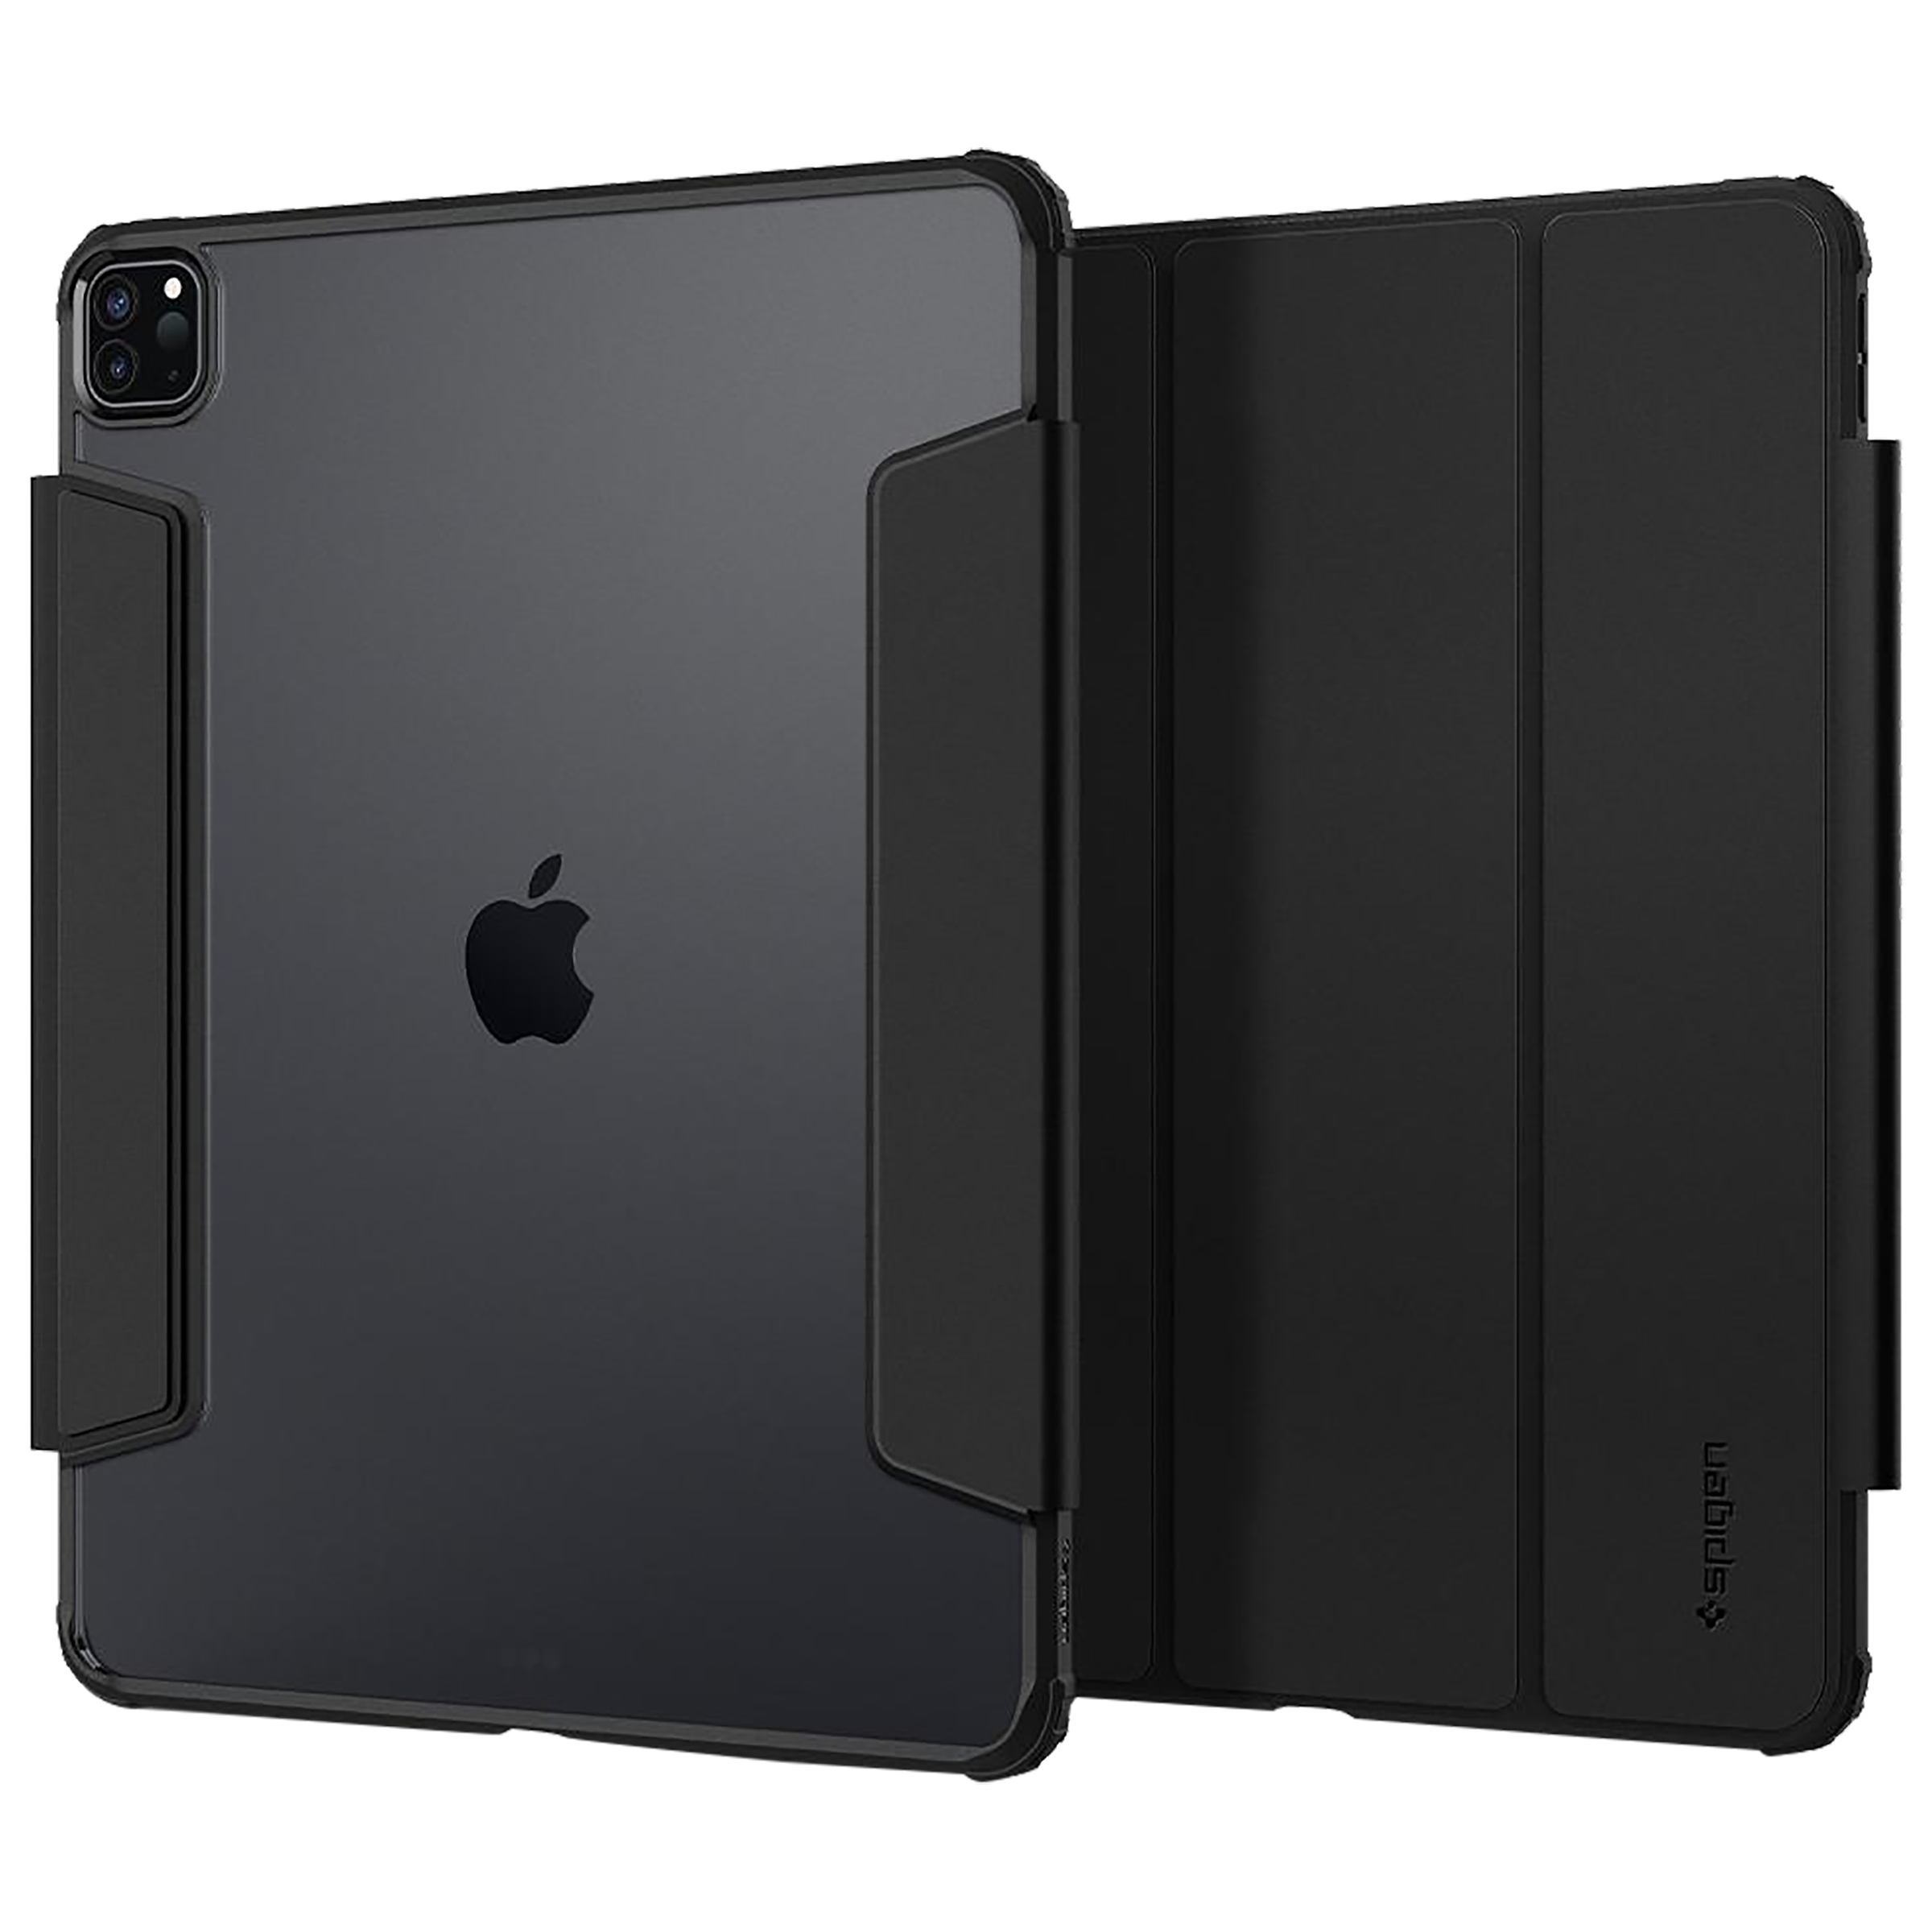 Spigen Ultra Hybrid Pro TPU & PC Back Case with Stand For iPad Pro 12.9" (2021) (Air Cushion Technology, ACS02880, Black)_1